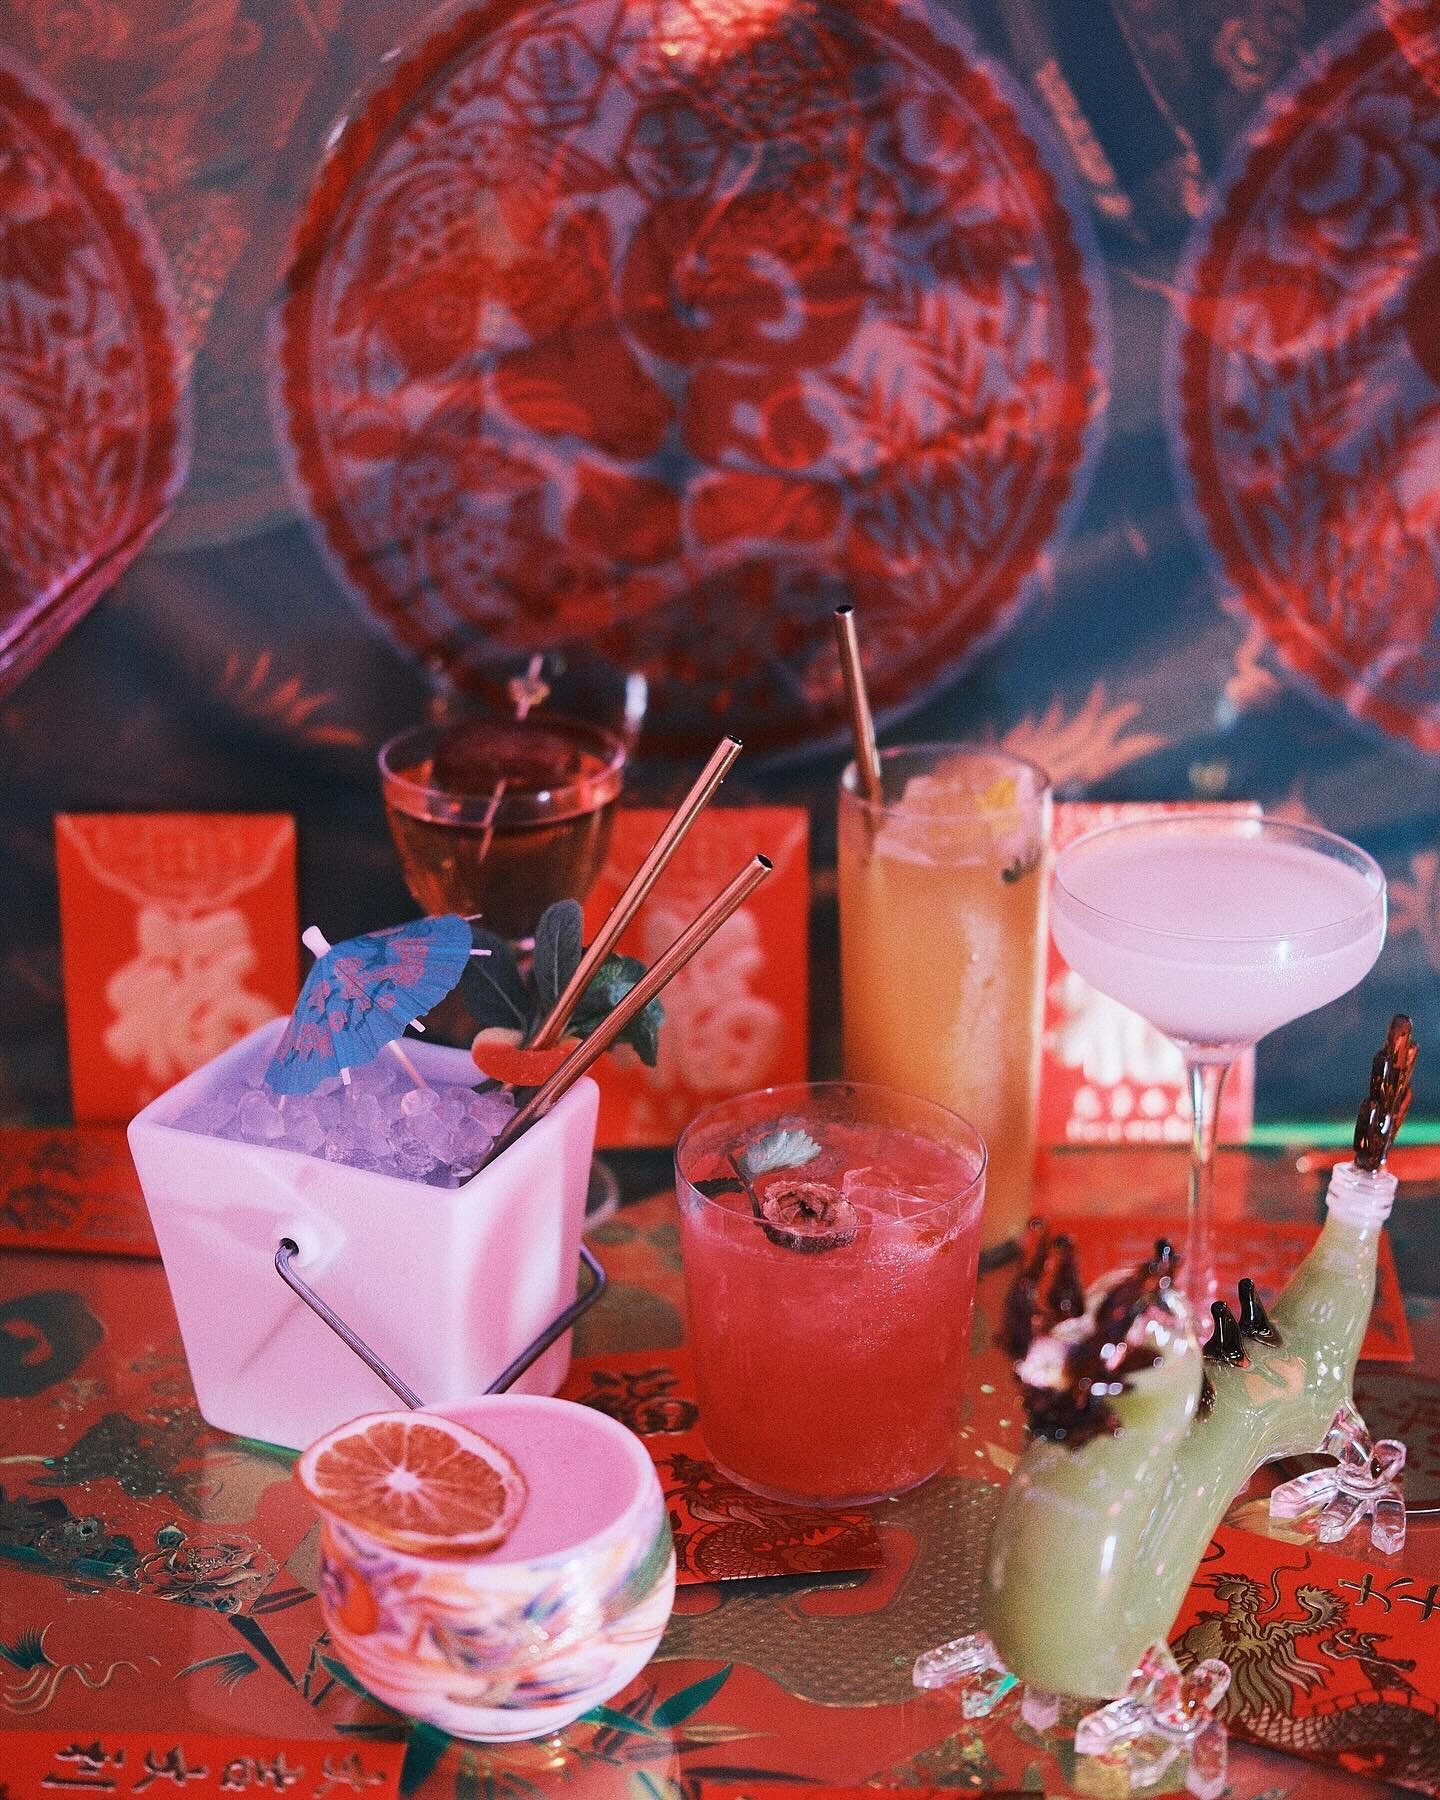 Red Envelope continues! Come by and try all our Lunar New Year cocktails. Happy Friday! 🧧🐲🏮